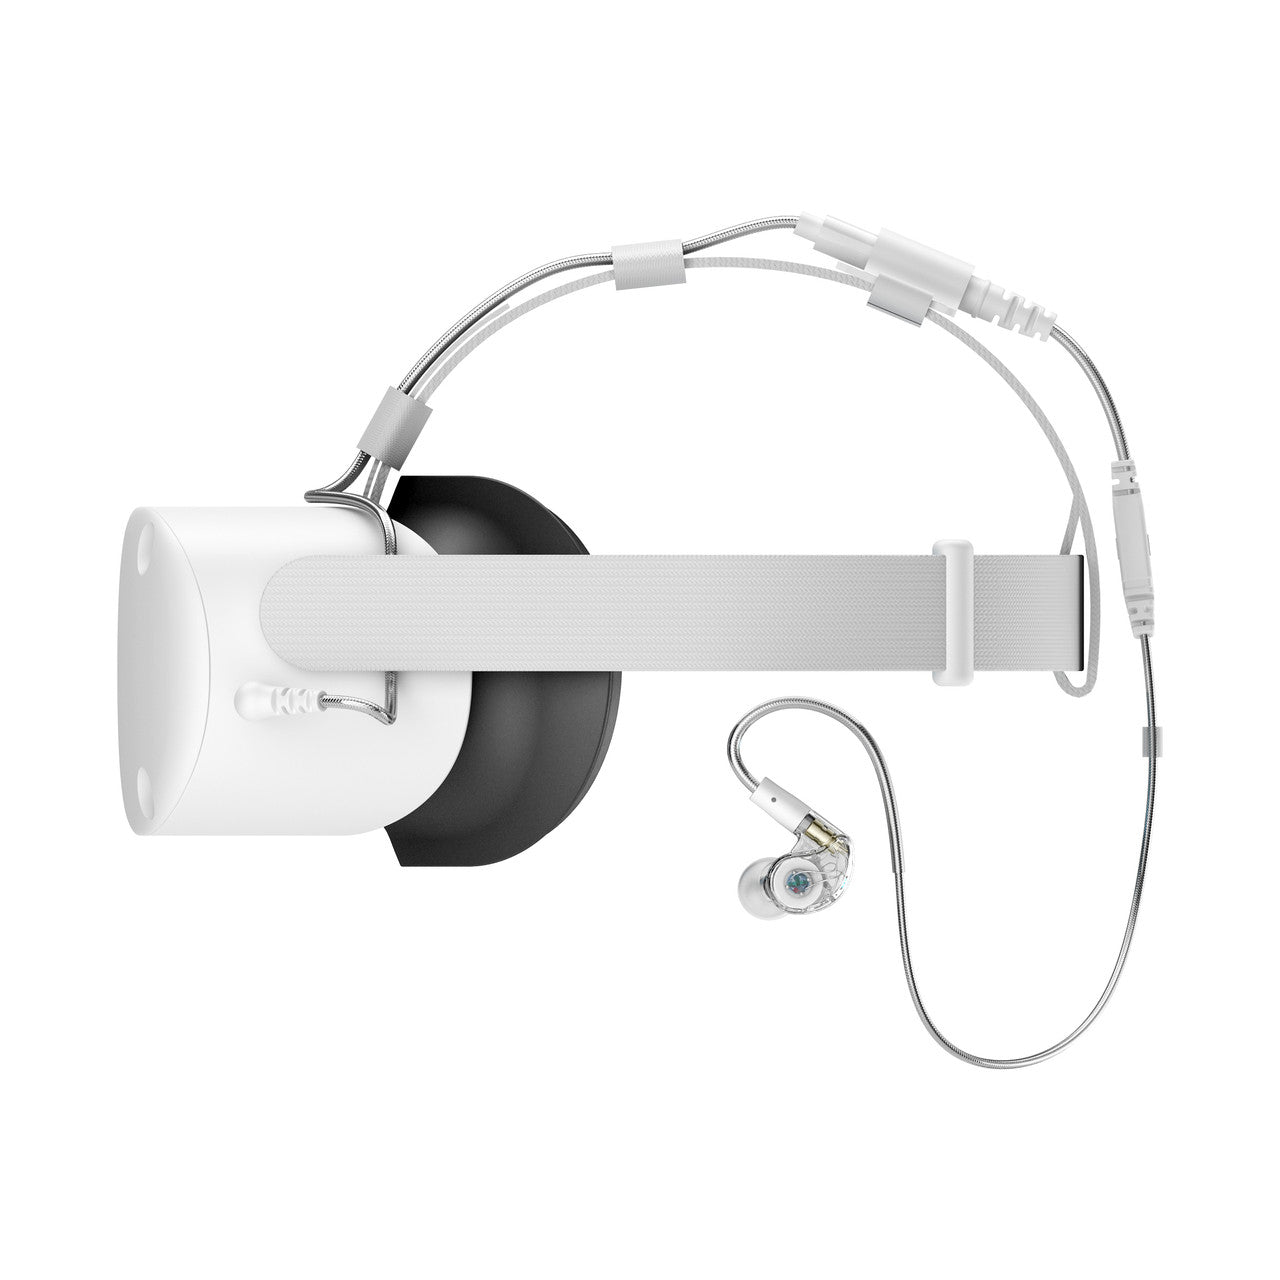 Image of M6 VR In-Ear Headphones for VR Headsets & Other Devices.